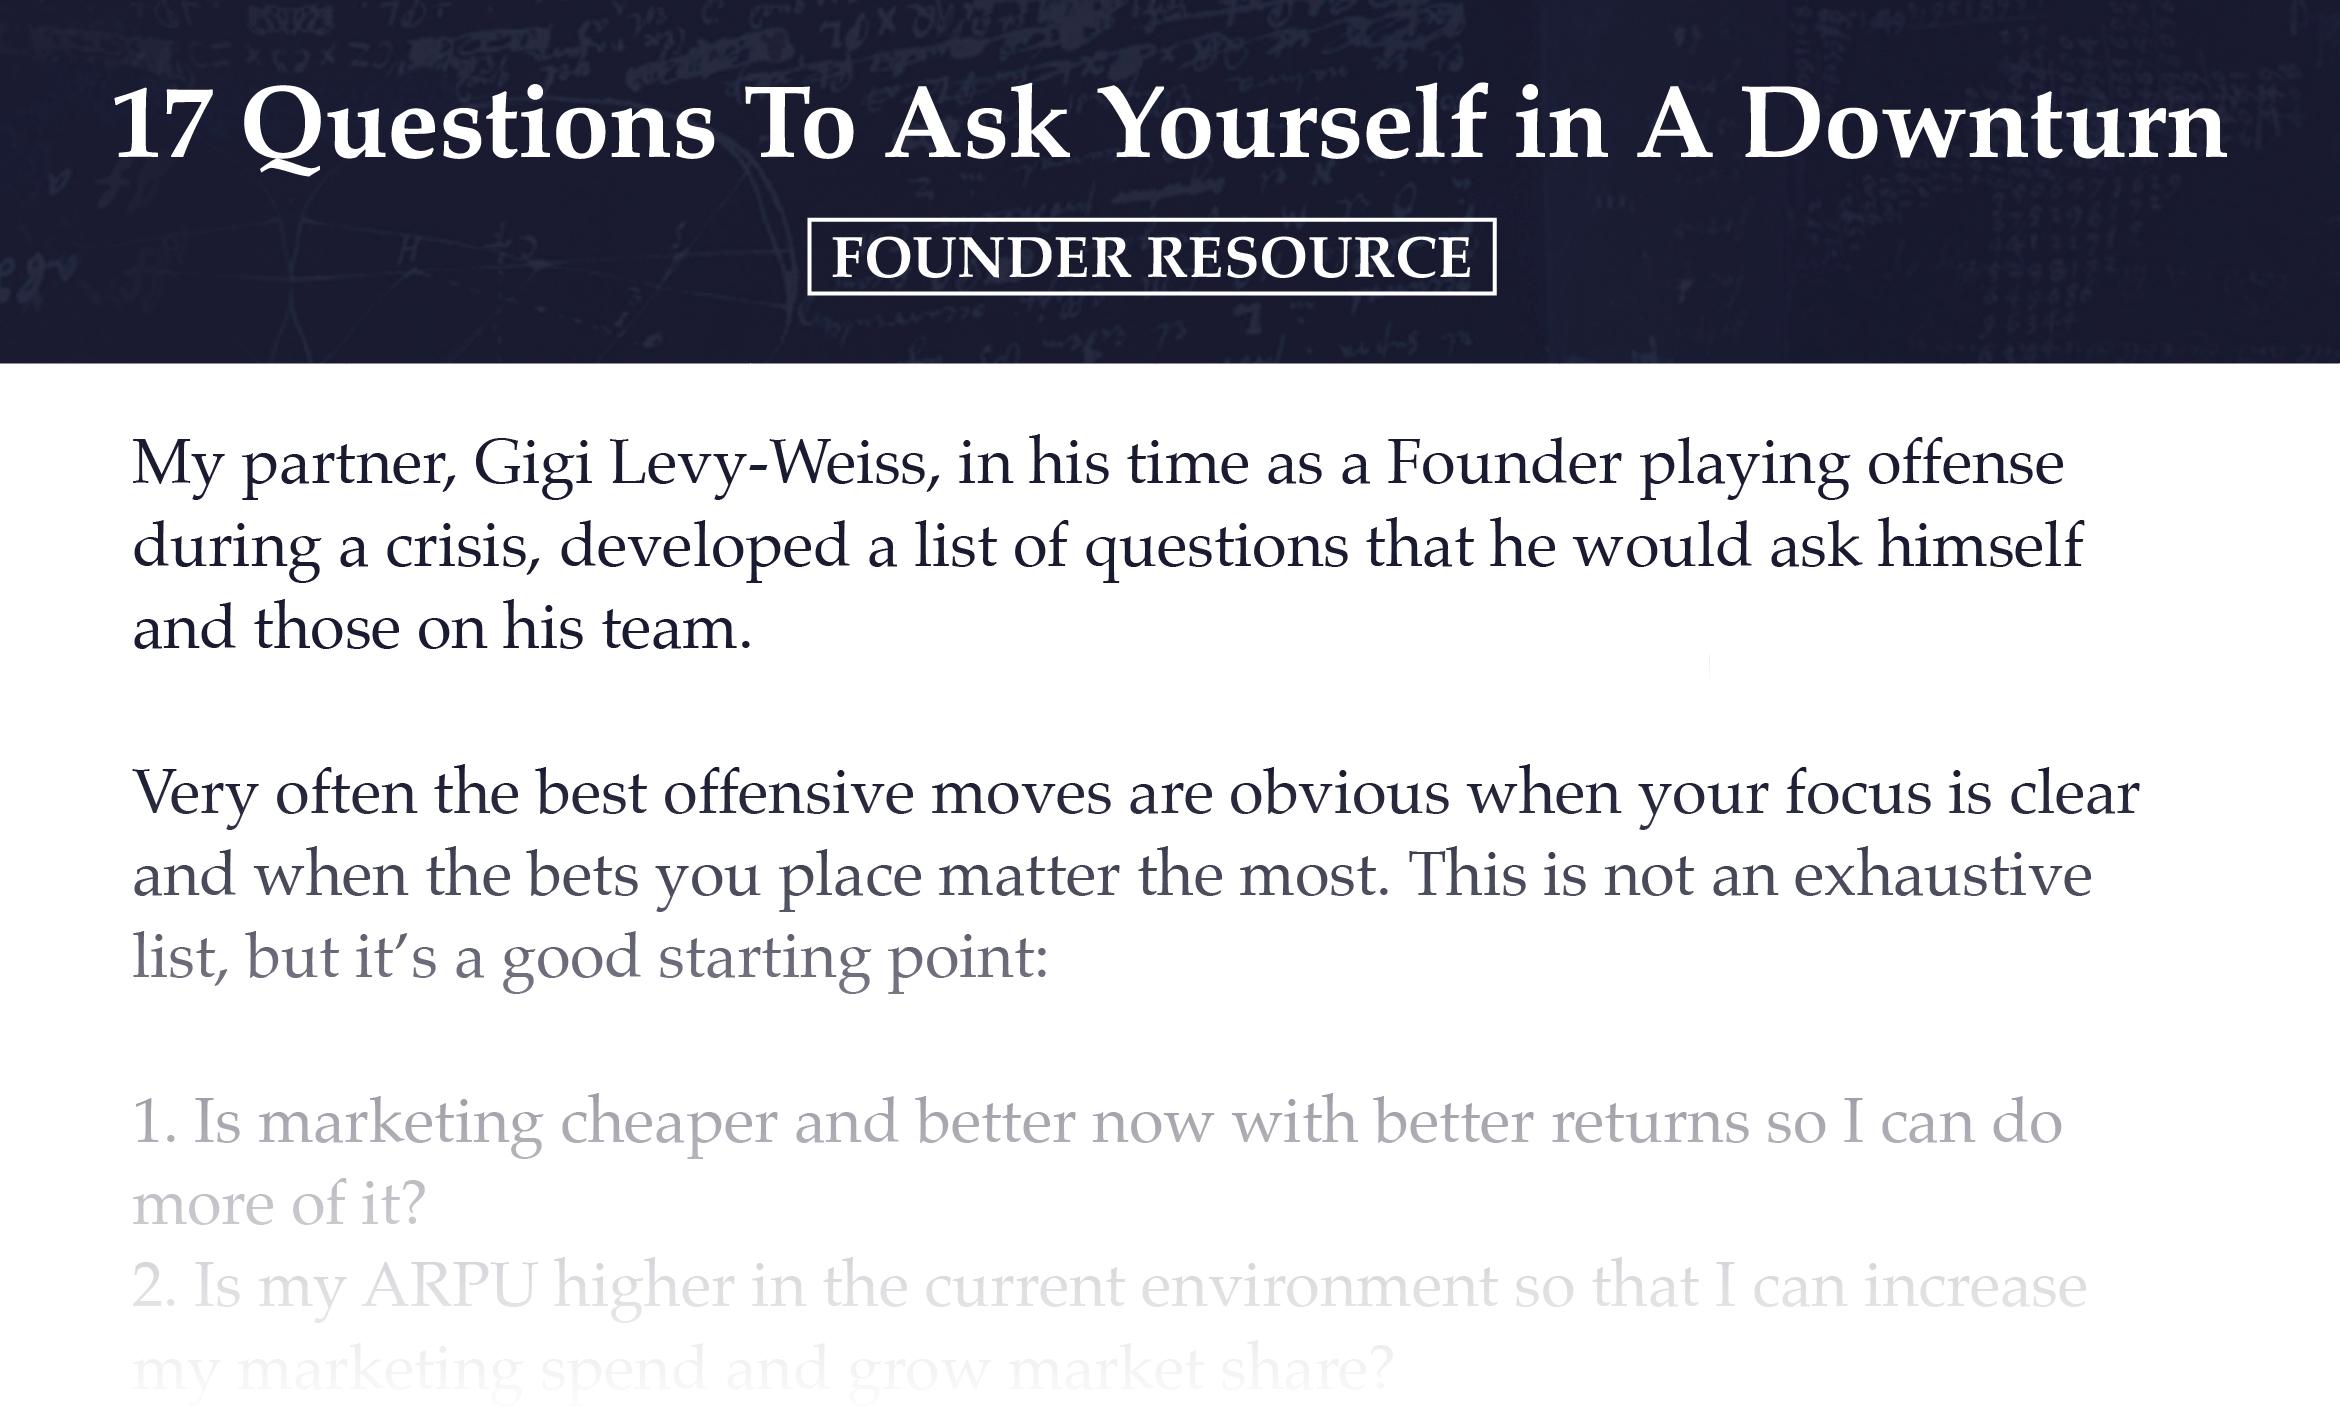 17 Questions _ In A Downturn